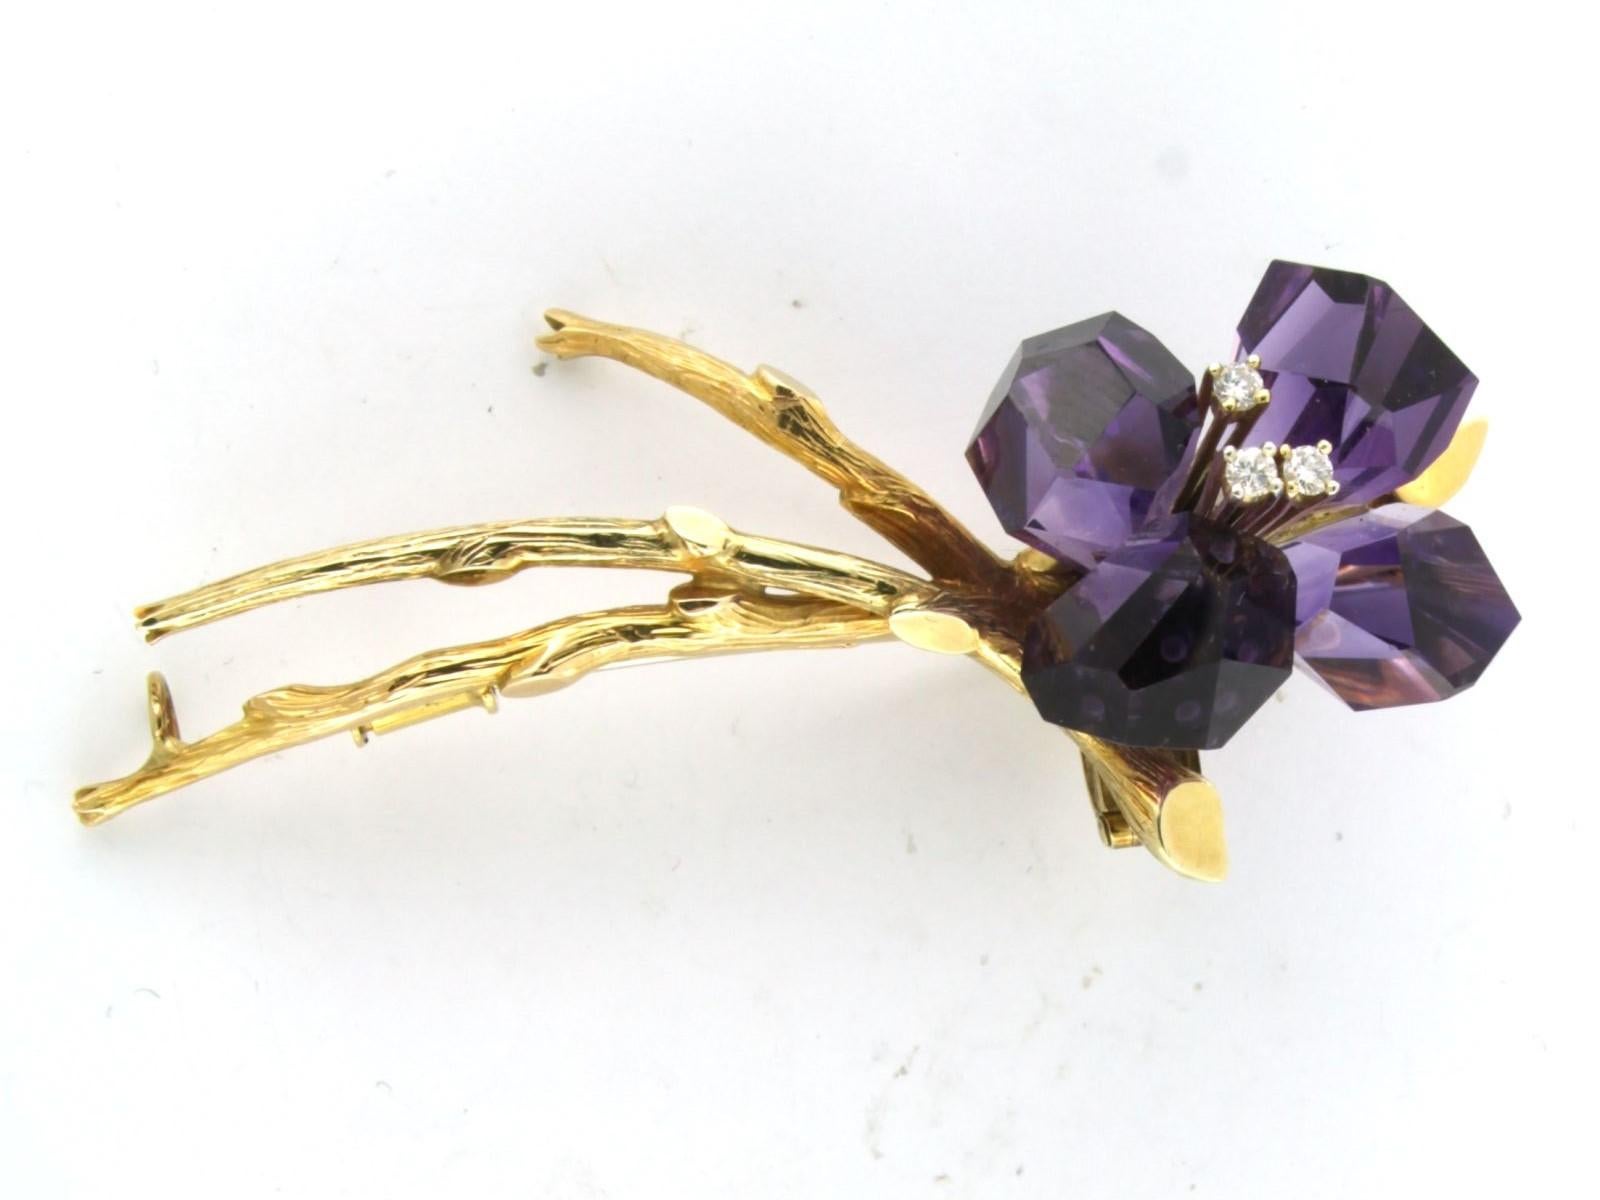 18 carat bicolor gold brooch in the shape of a flower set with amethyst and brilliant cut diamonds in total 0.15ct - F/G - VS/SI

detailed description:

The size of the brooch is 7.0 cm x 3.7 cm wide

weight: 23.2 grams

set with

- 4 x 1.6 cm x 1.0